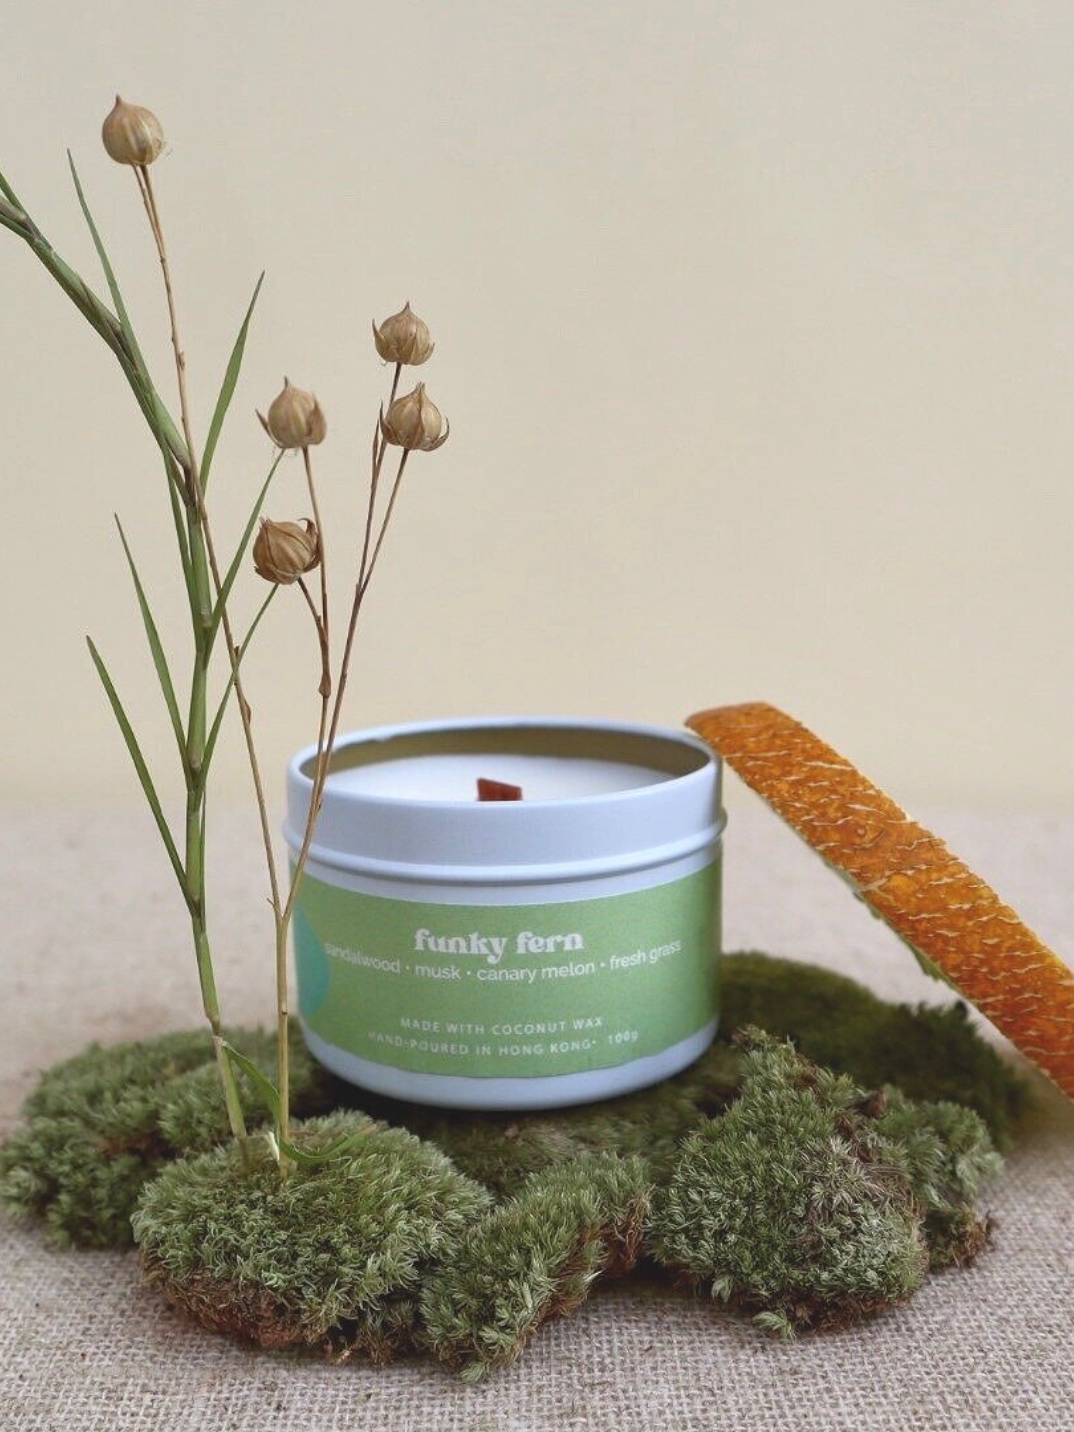 funky fern candle natural eco-friendly candles hand poured made with soy wax and coconut wax ethical sustainable women-owned brands shop sustainable brands